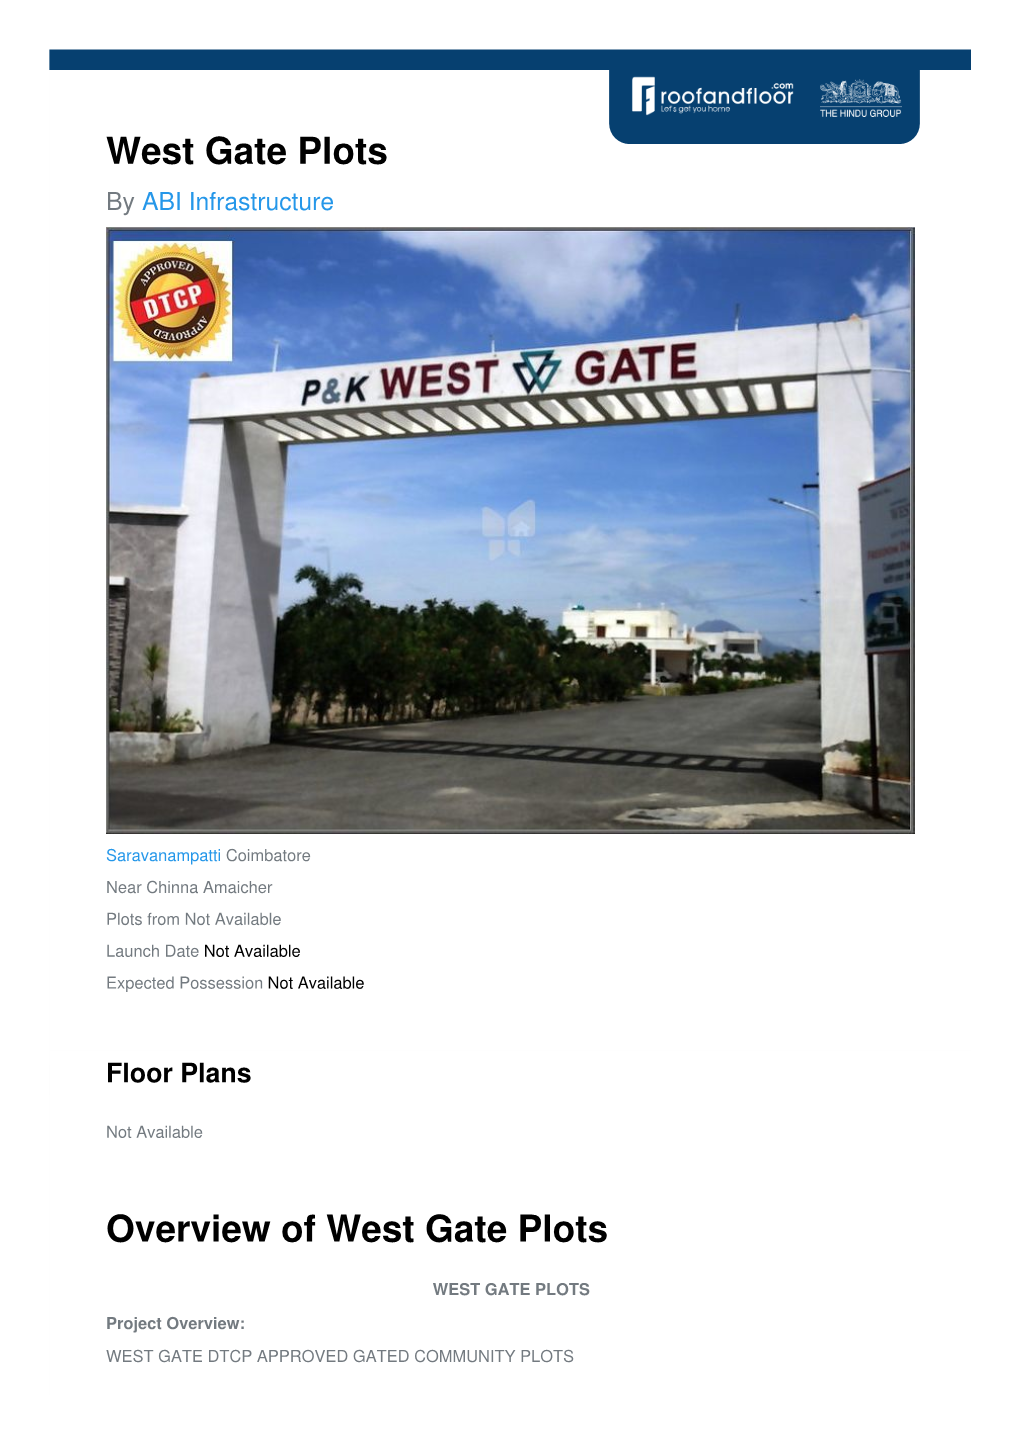 West Gate Plots by ABI Infrastructure